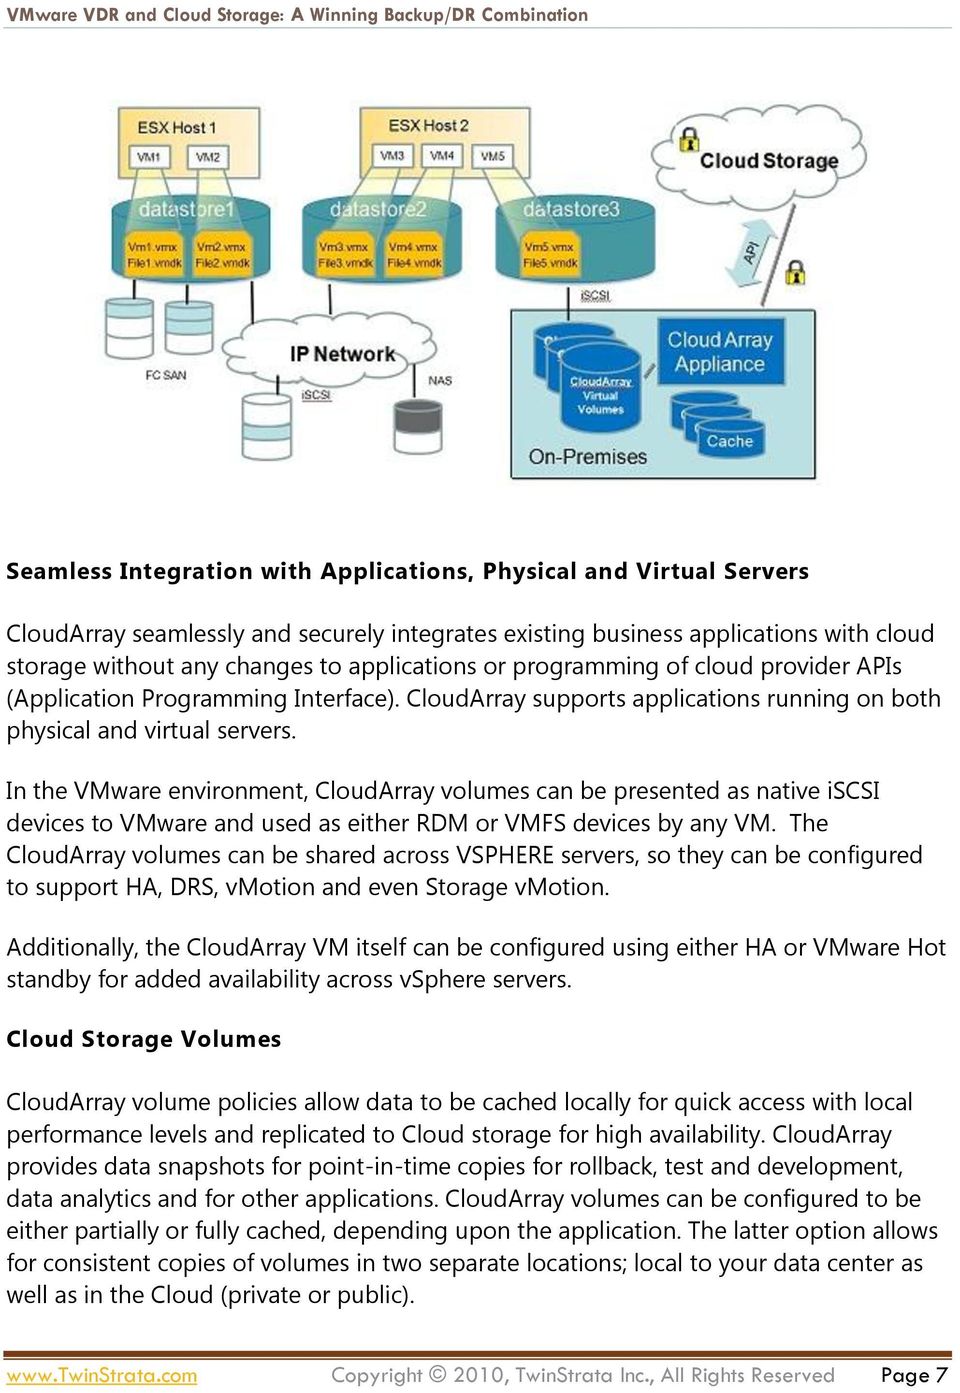 In the VMware environment, CloudArray volumes can be presented as native iscsi devices to VMware and used as either RDM or VMFS devices by any VM.